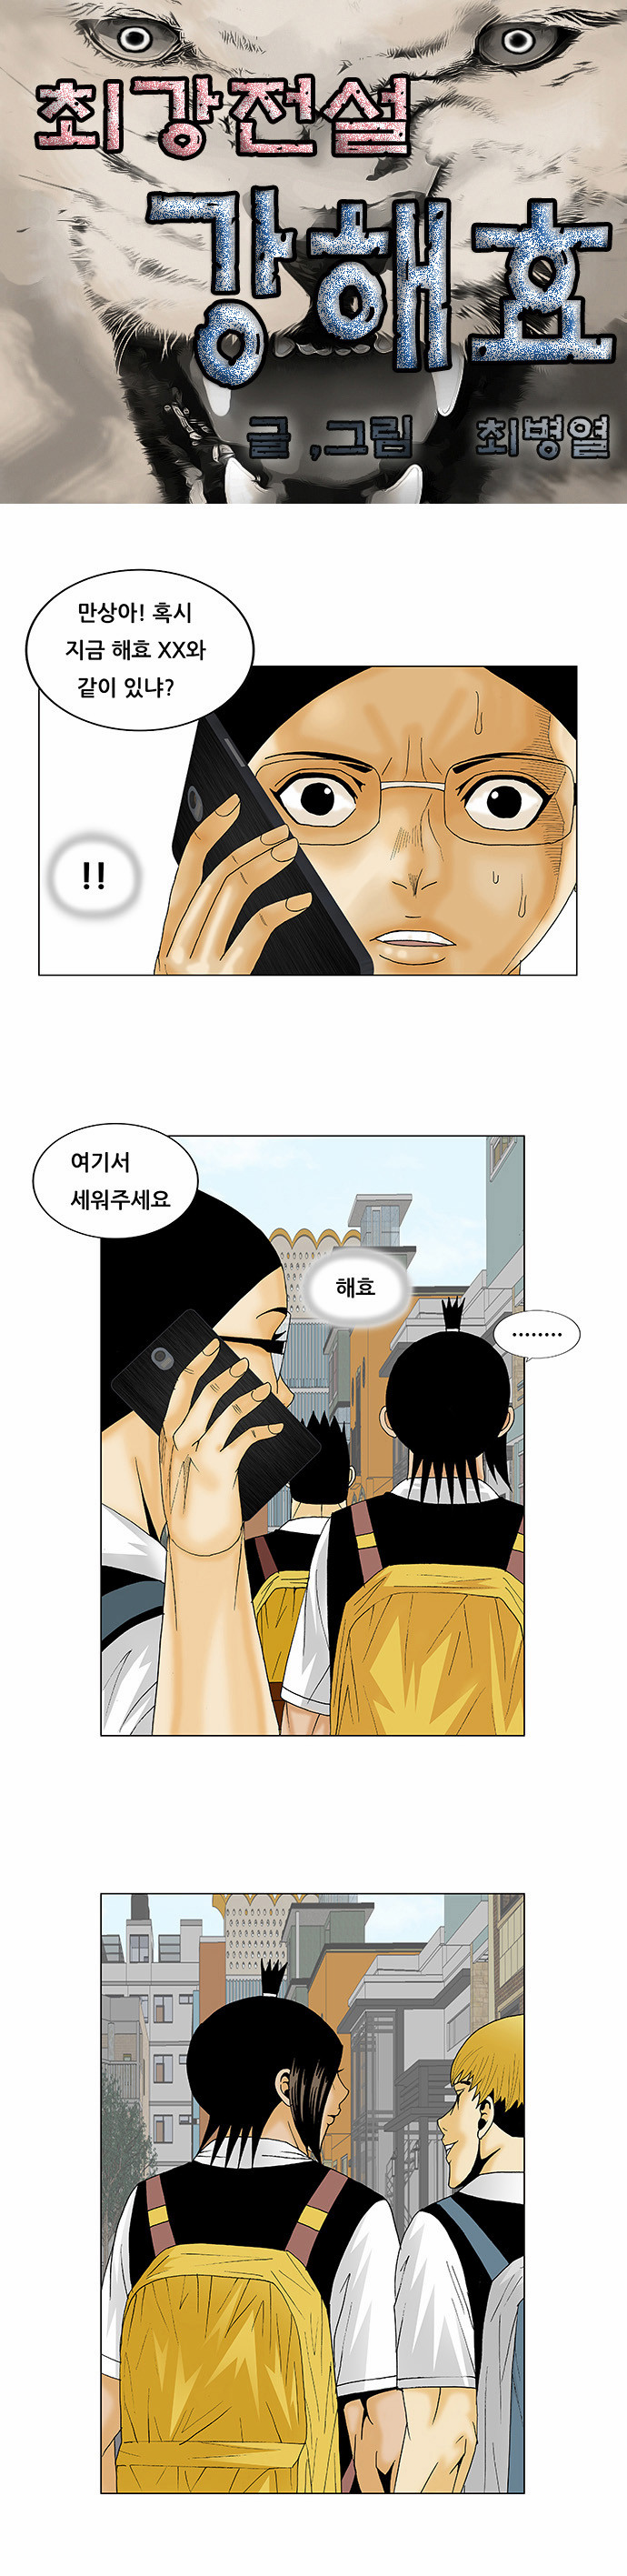 Ultimate Legend - Kang Hae Hyo - Chapter 126 - Page 1